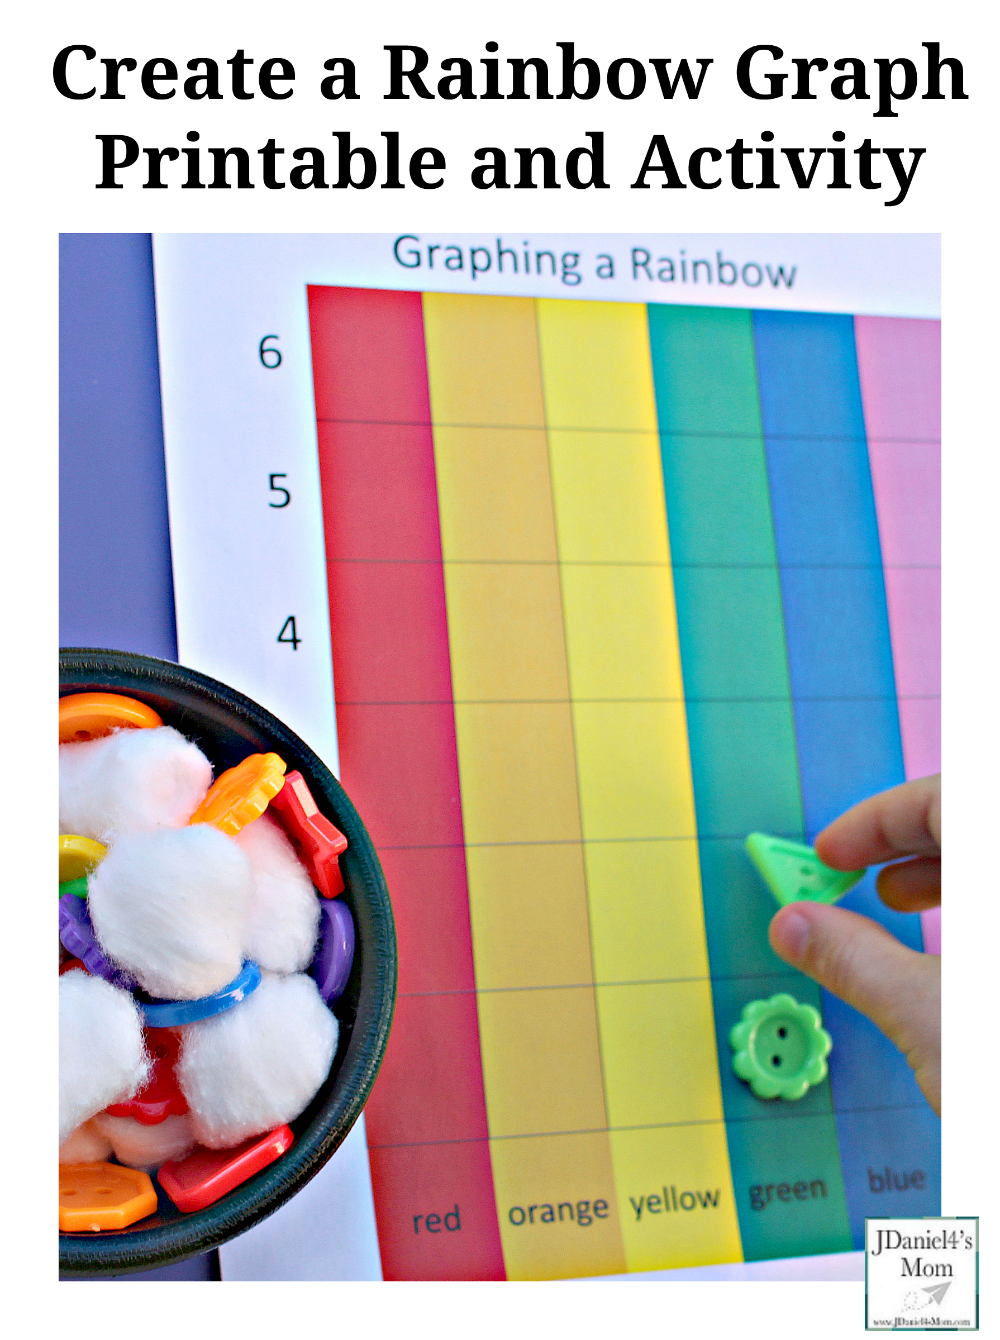 Create a Rainbow Graph Printable and Activity- Your children at home and students at school will have fun exploring this create a graph activity. It features a free printable rainbow themed graphing mat., a cloud ( cotton ball filled) bowl filled with color buttons. Children will have fun creating picture graph with the colored buttons.